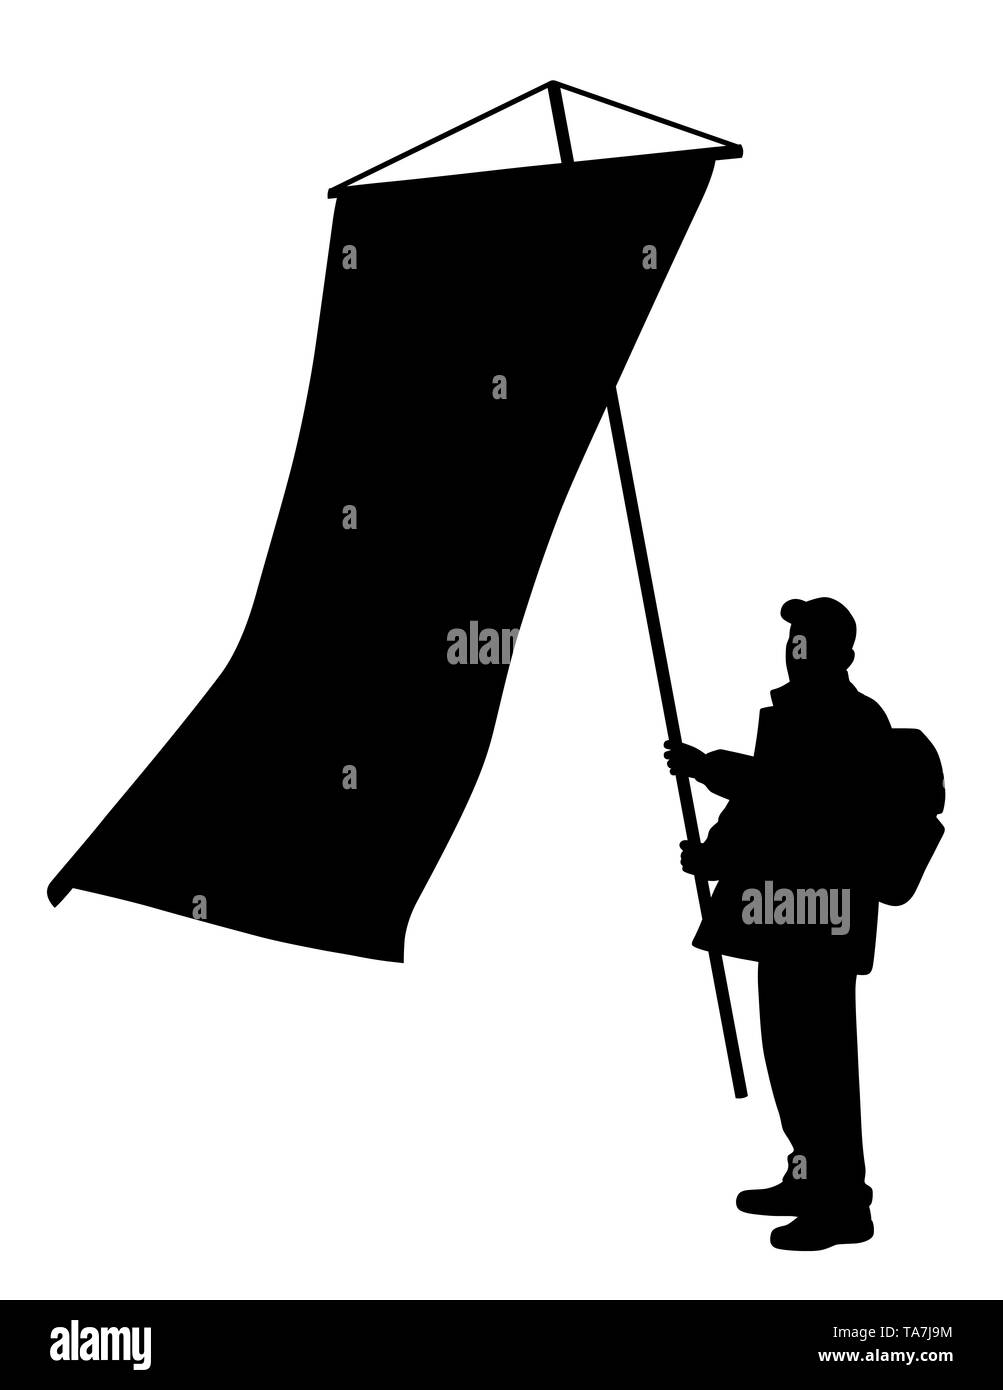 Man holding a large vertical medieval flag Stock Photo